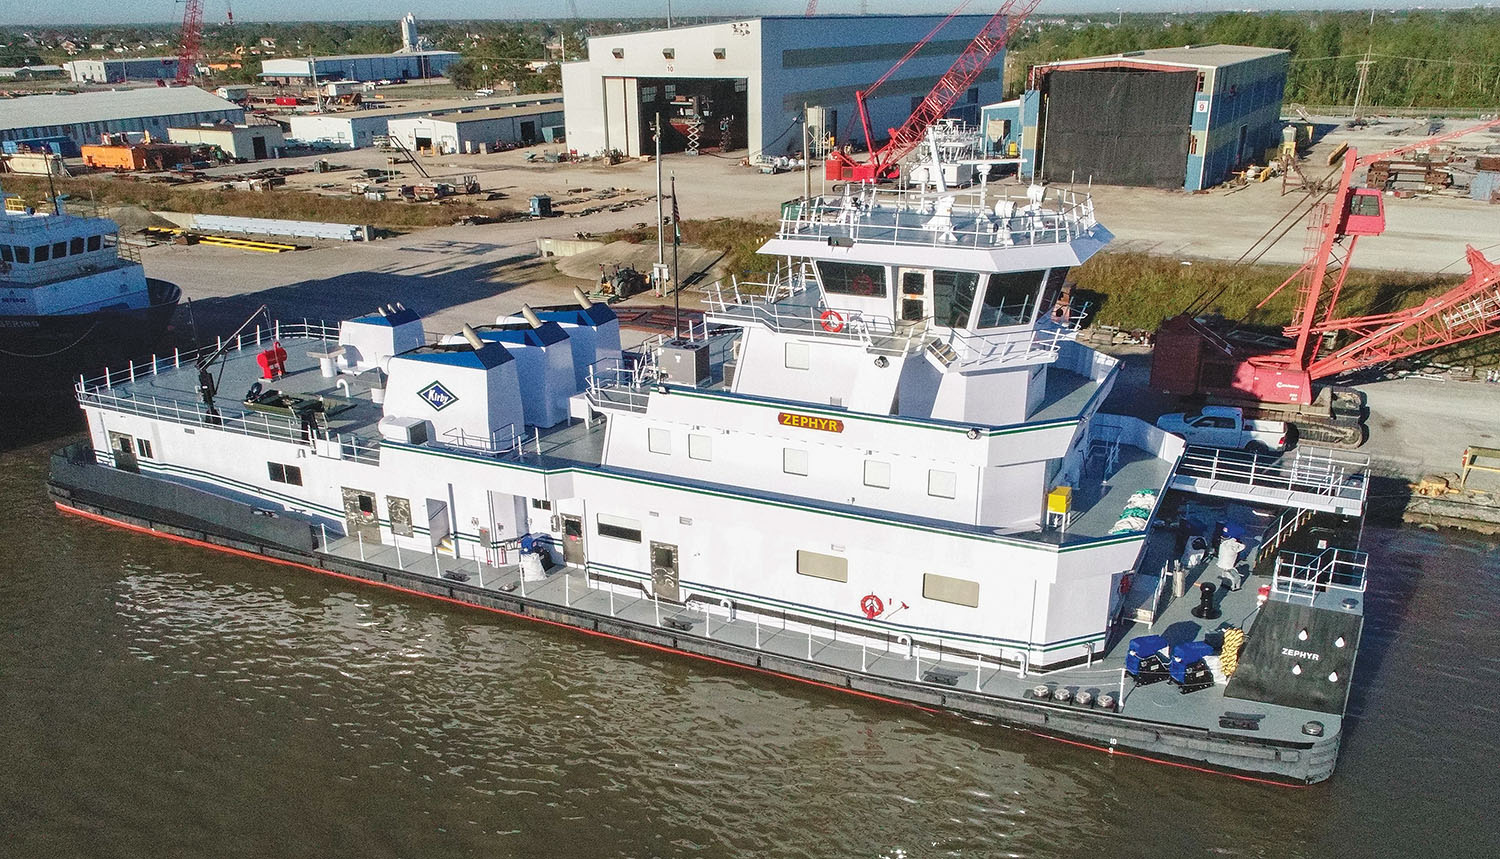 The 6,600 hp. mv. Zephyr is the third of three towboats that C&C Marine & Repair constructed for Hines Furlong Line, after the mvs. Scarlett Rose Furlong and Bowling Green. The Bowling Green and Zephyr are operating under long-term leases by Kirby Inland Marine. (Photo courtesy of C&C Marine & Repair)